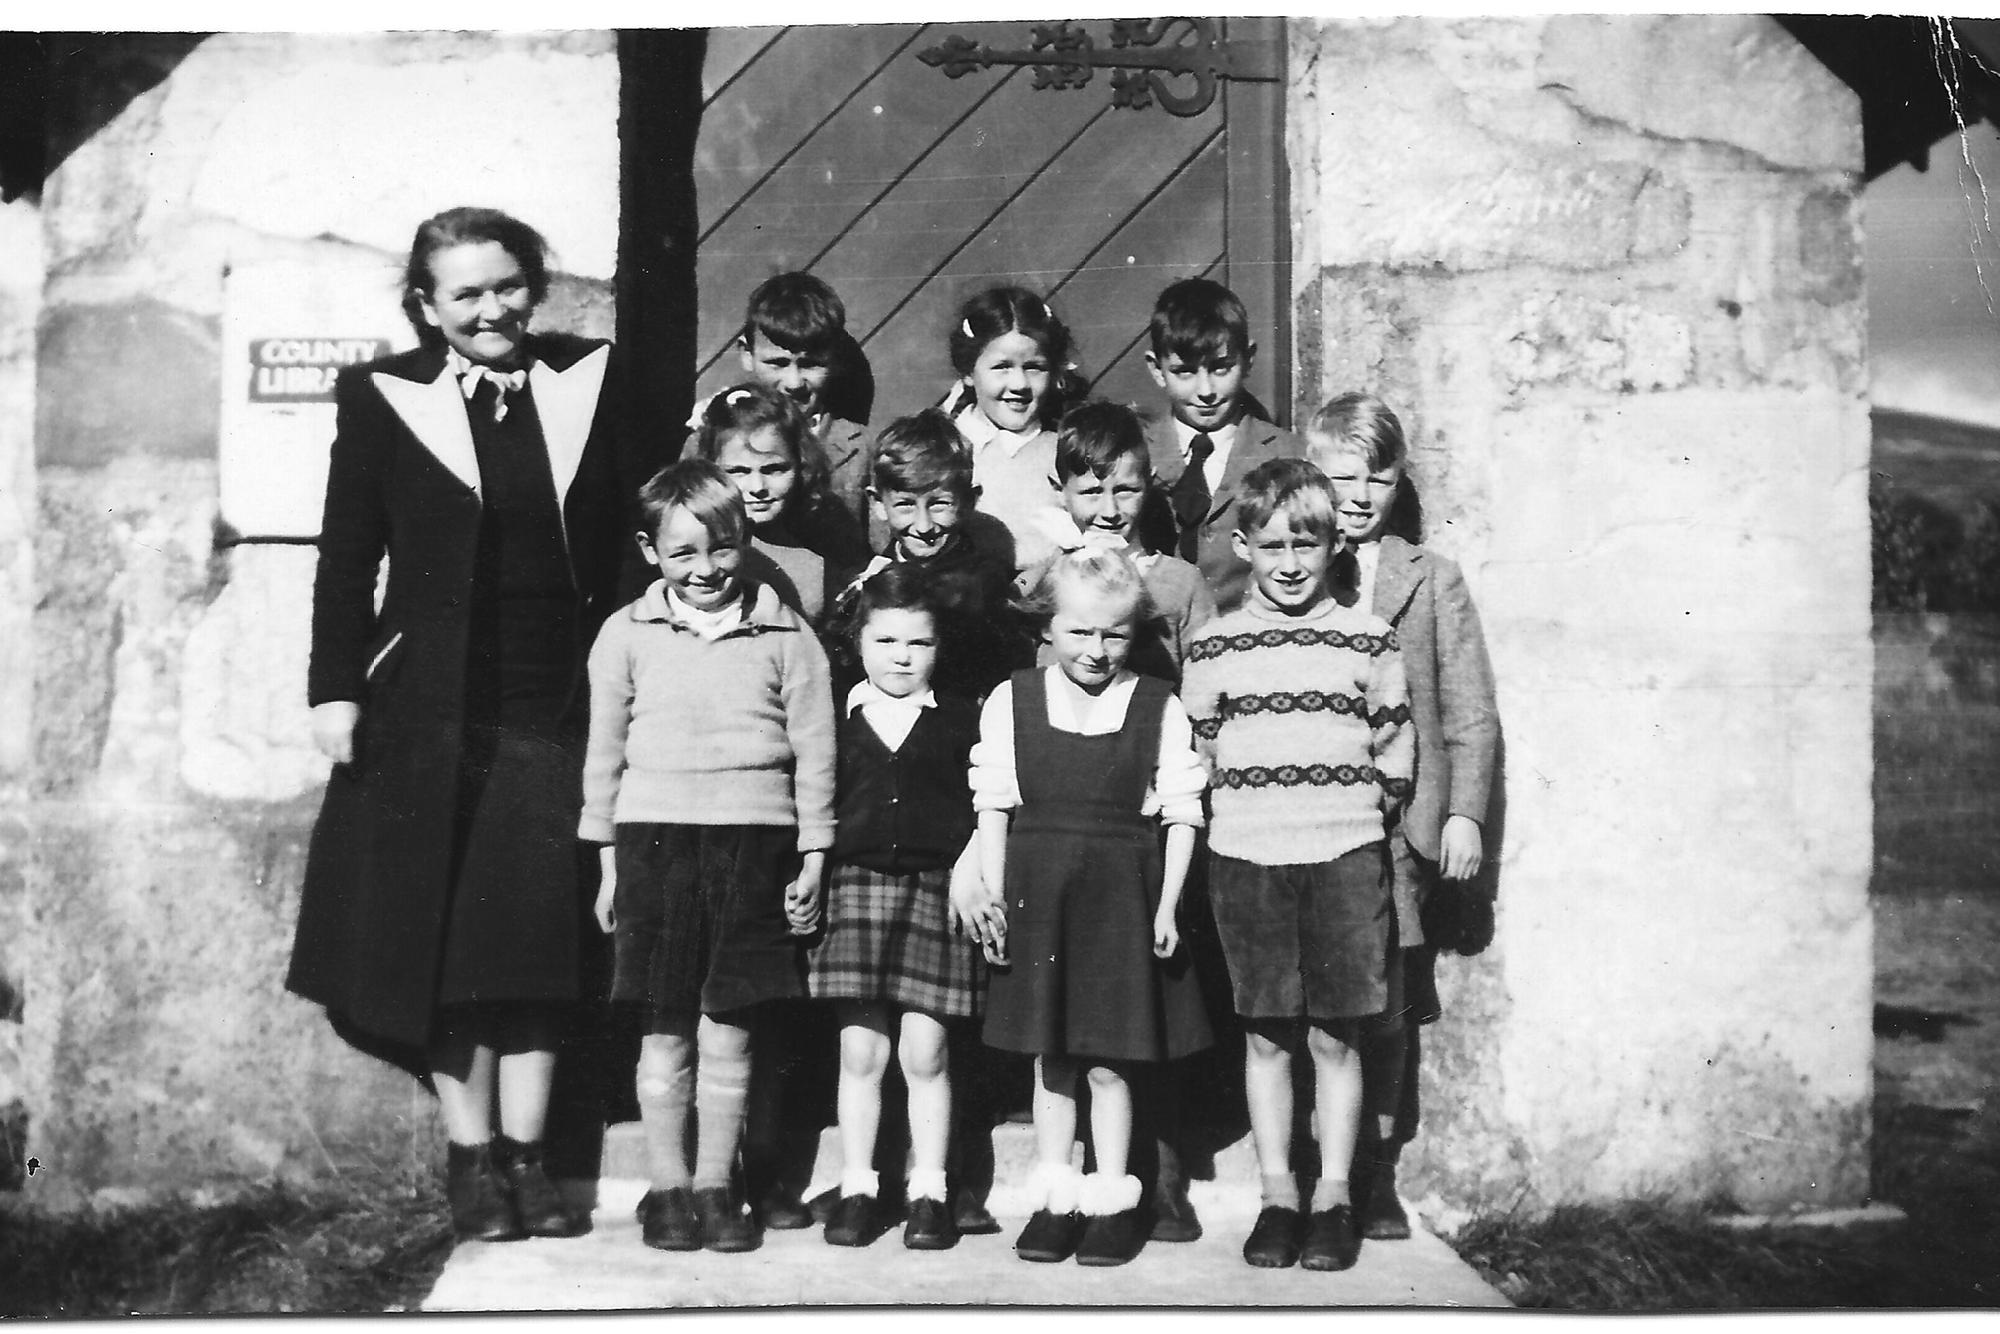 SACP-17-11-22-Nostalgia Miss Michie with school bairns about mid 50s-SCO.jpg